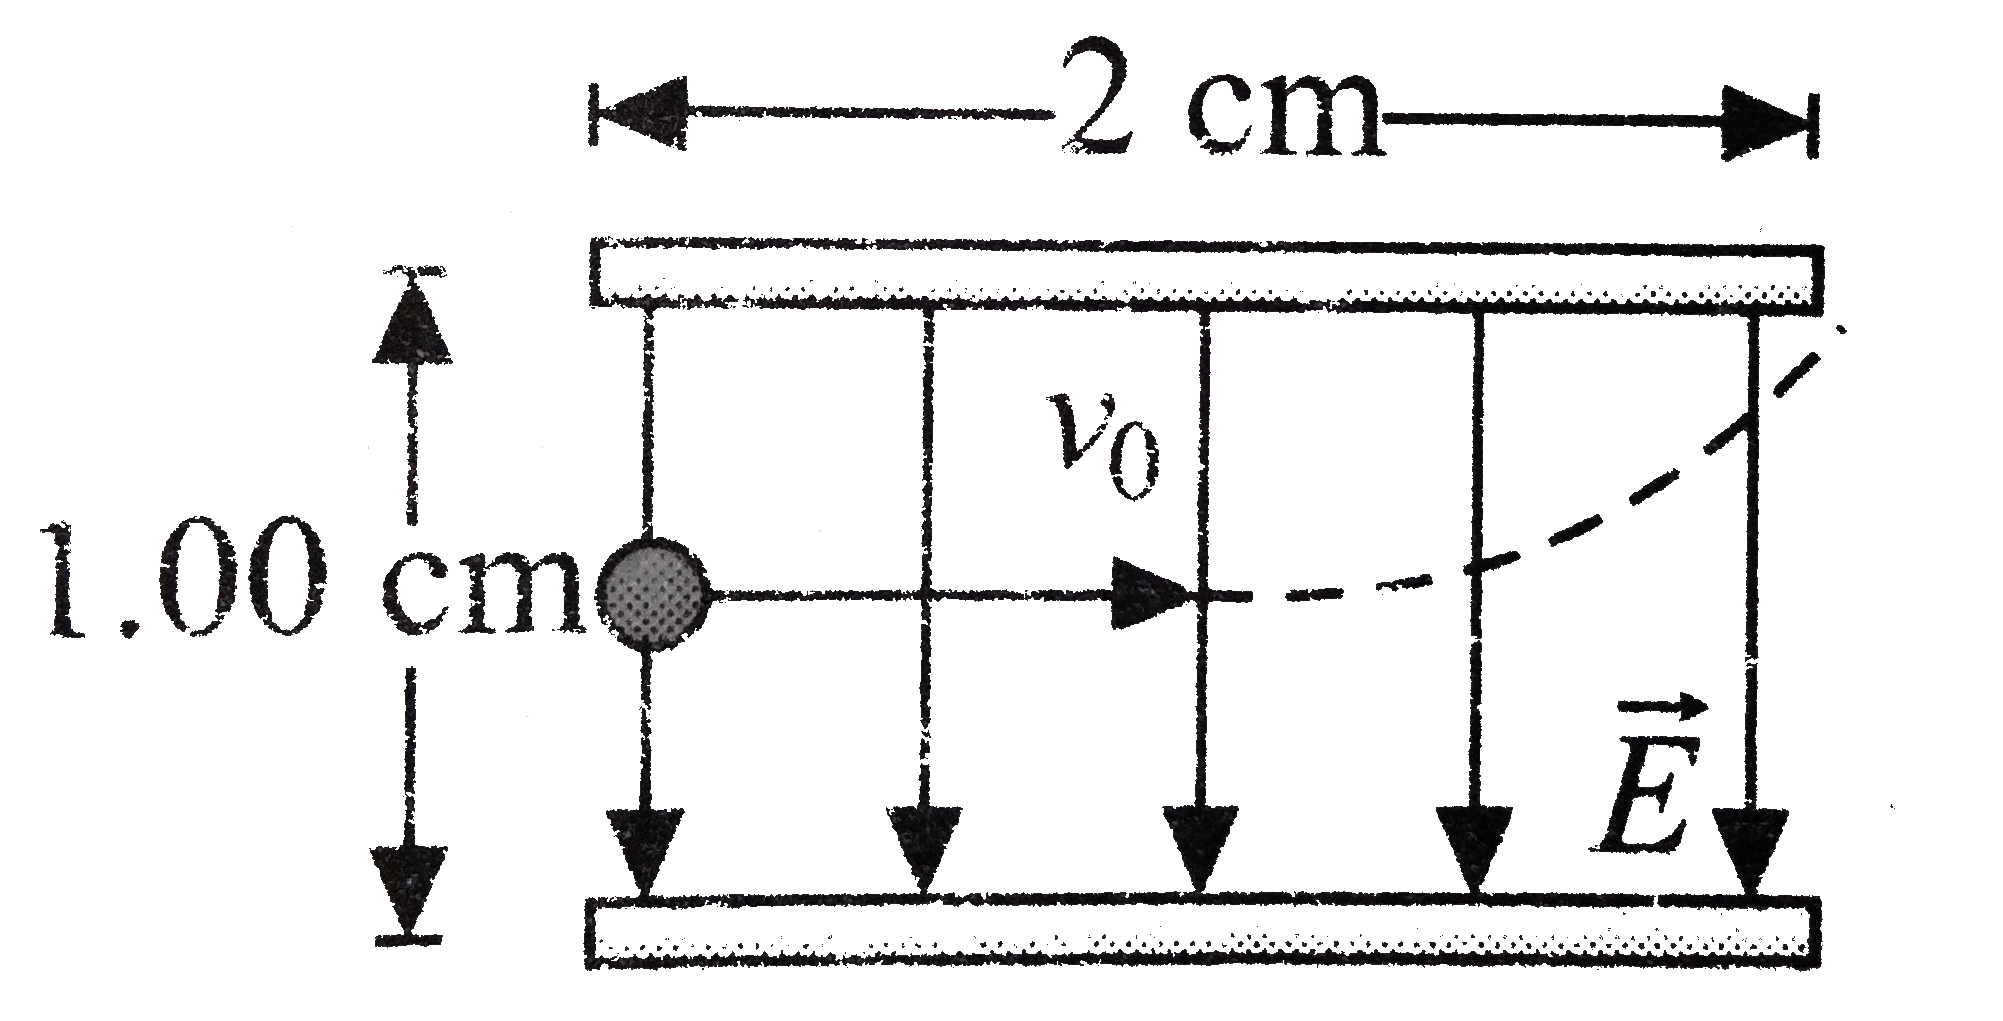 An electron is projected with an initial speed v(0)=1.60xx10^(6)ms^(-1) into the uniform field between the parallel plates as shown in fig. Assume that the field between the plates is uniform and directed vertically downward, and that the field outside the plates is zero. the electrons enters the field at a point midway between the plates. Mass of electron is 9.1xx10^(-31)kg.       The vertical displacement traveled by the proton as it exits the region between the plated is (mass pf proton is 1.67xx10^(-27)kg).